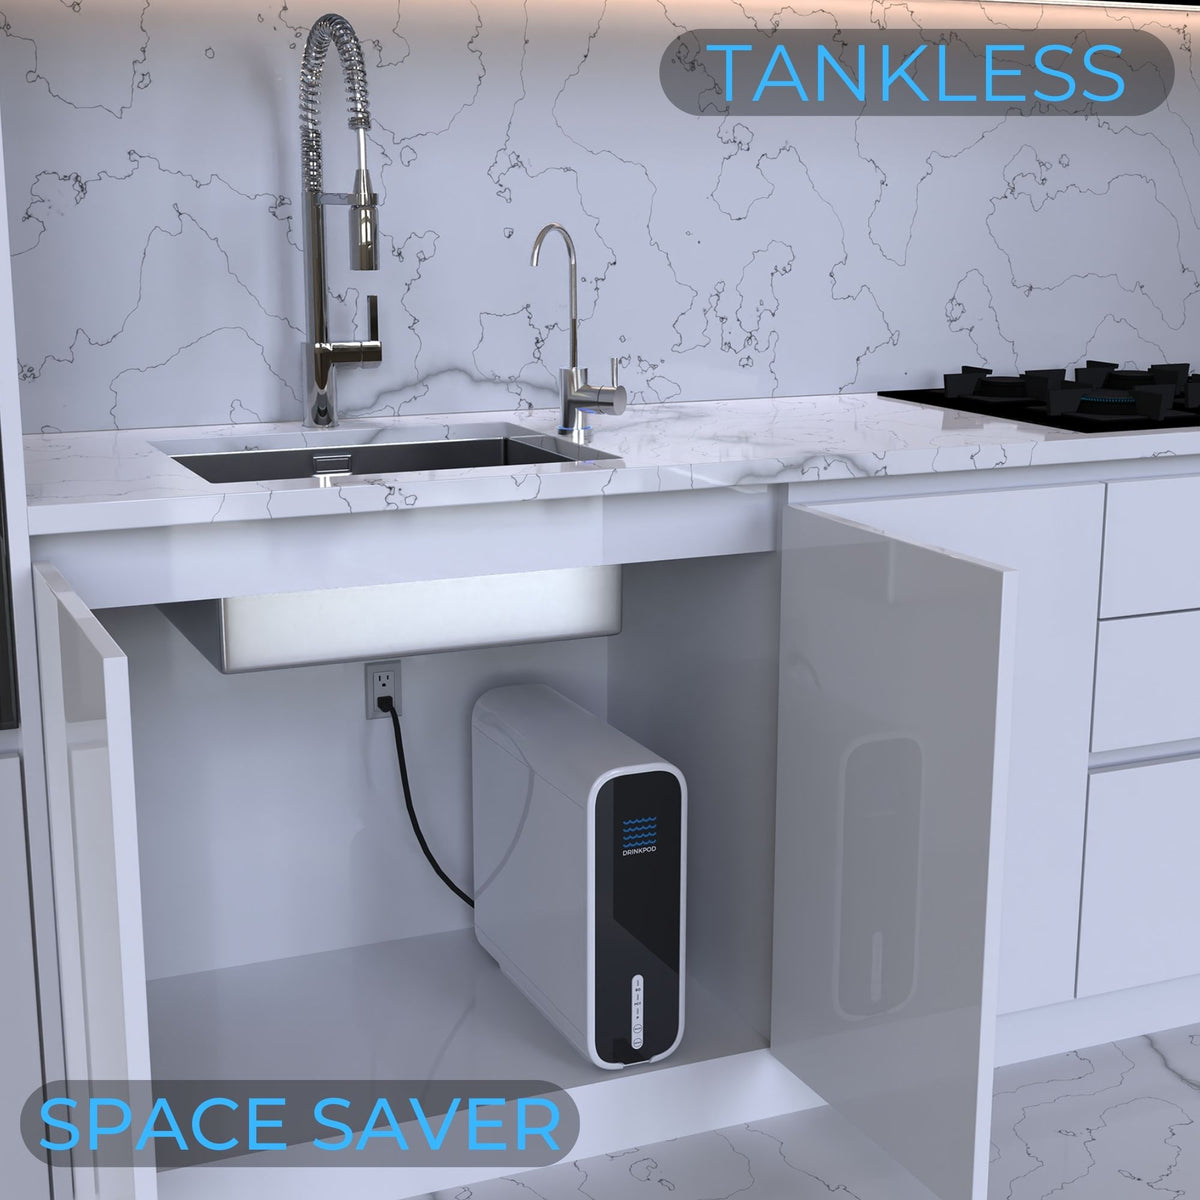 Drinkpod Tankless Reverse Osmosis Under Sink with Brushed Nickel Faucet